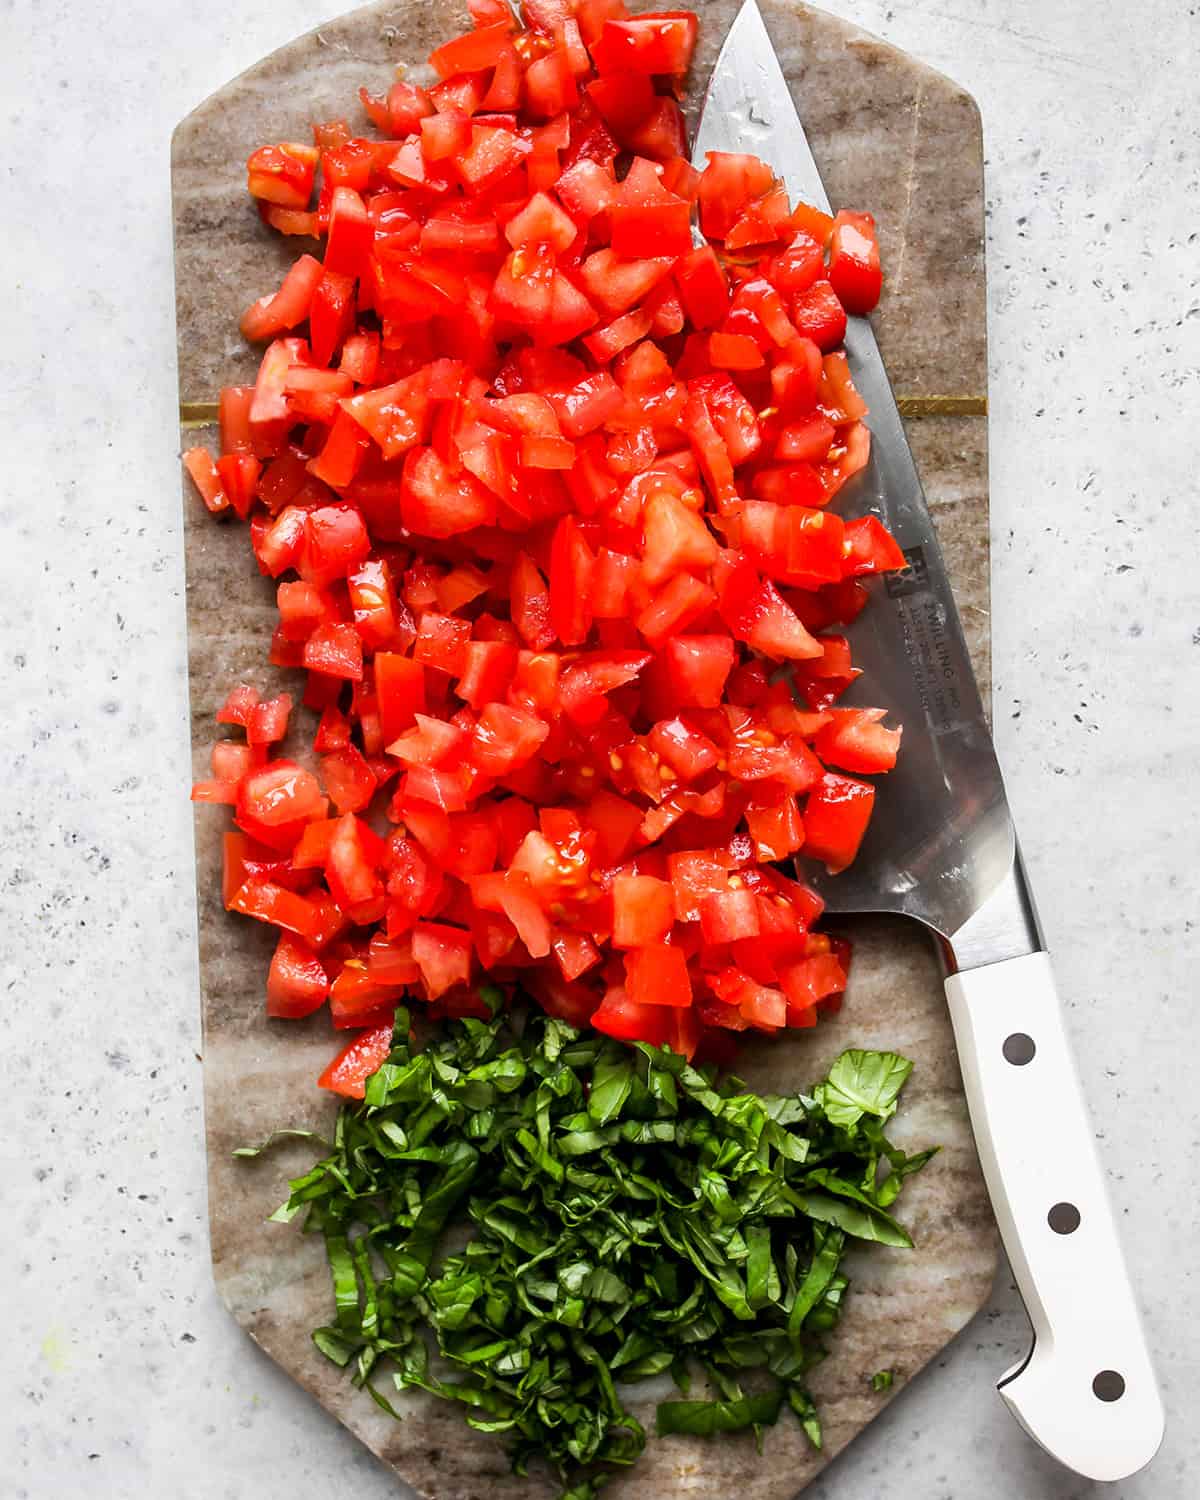 photo showing How to Make Bruschetta - dicing tomatoes and cutting basil